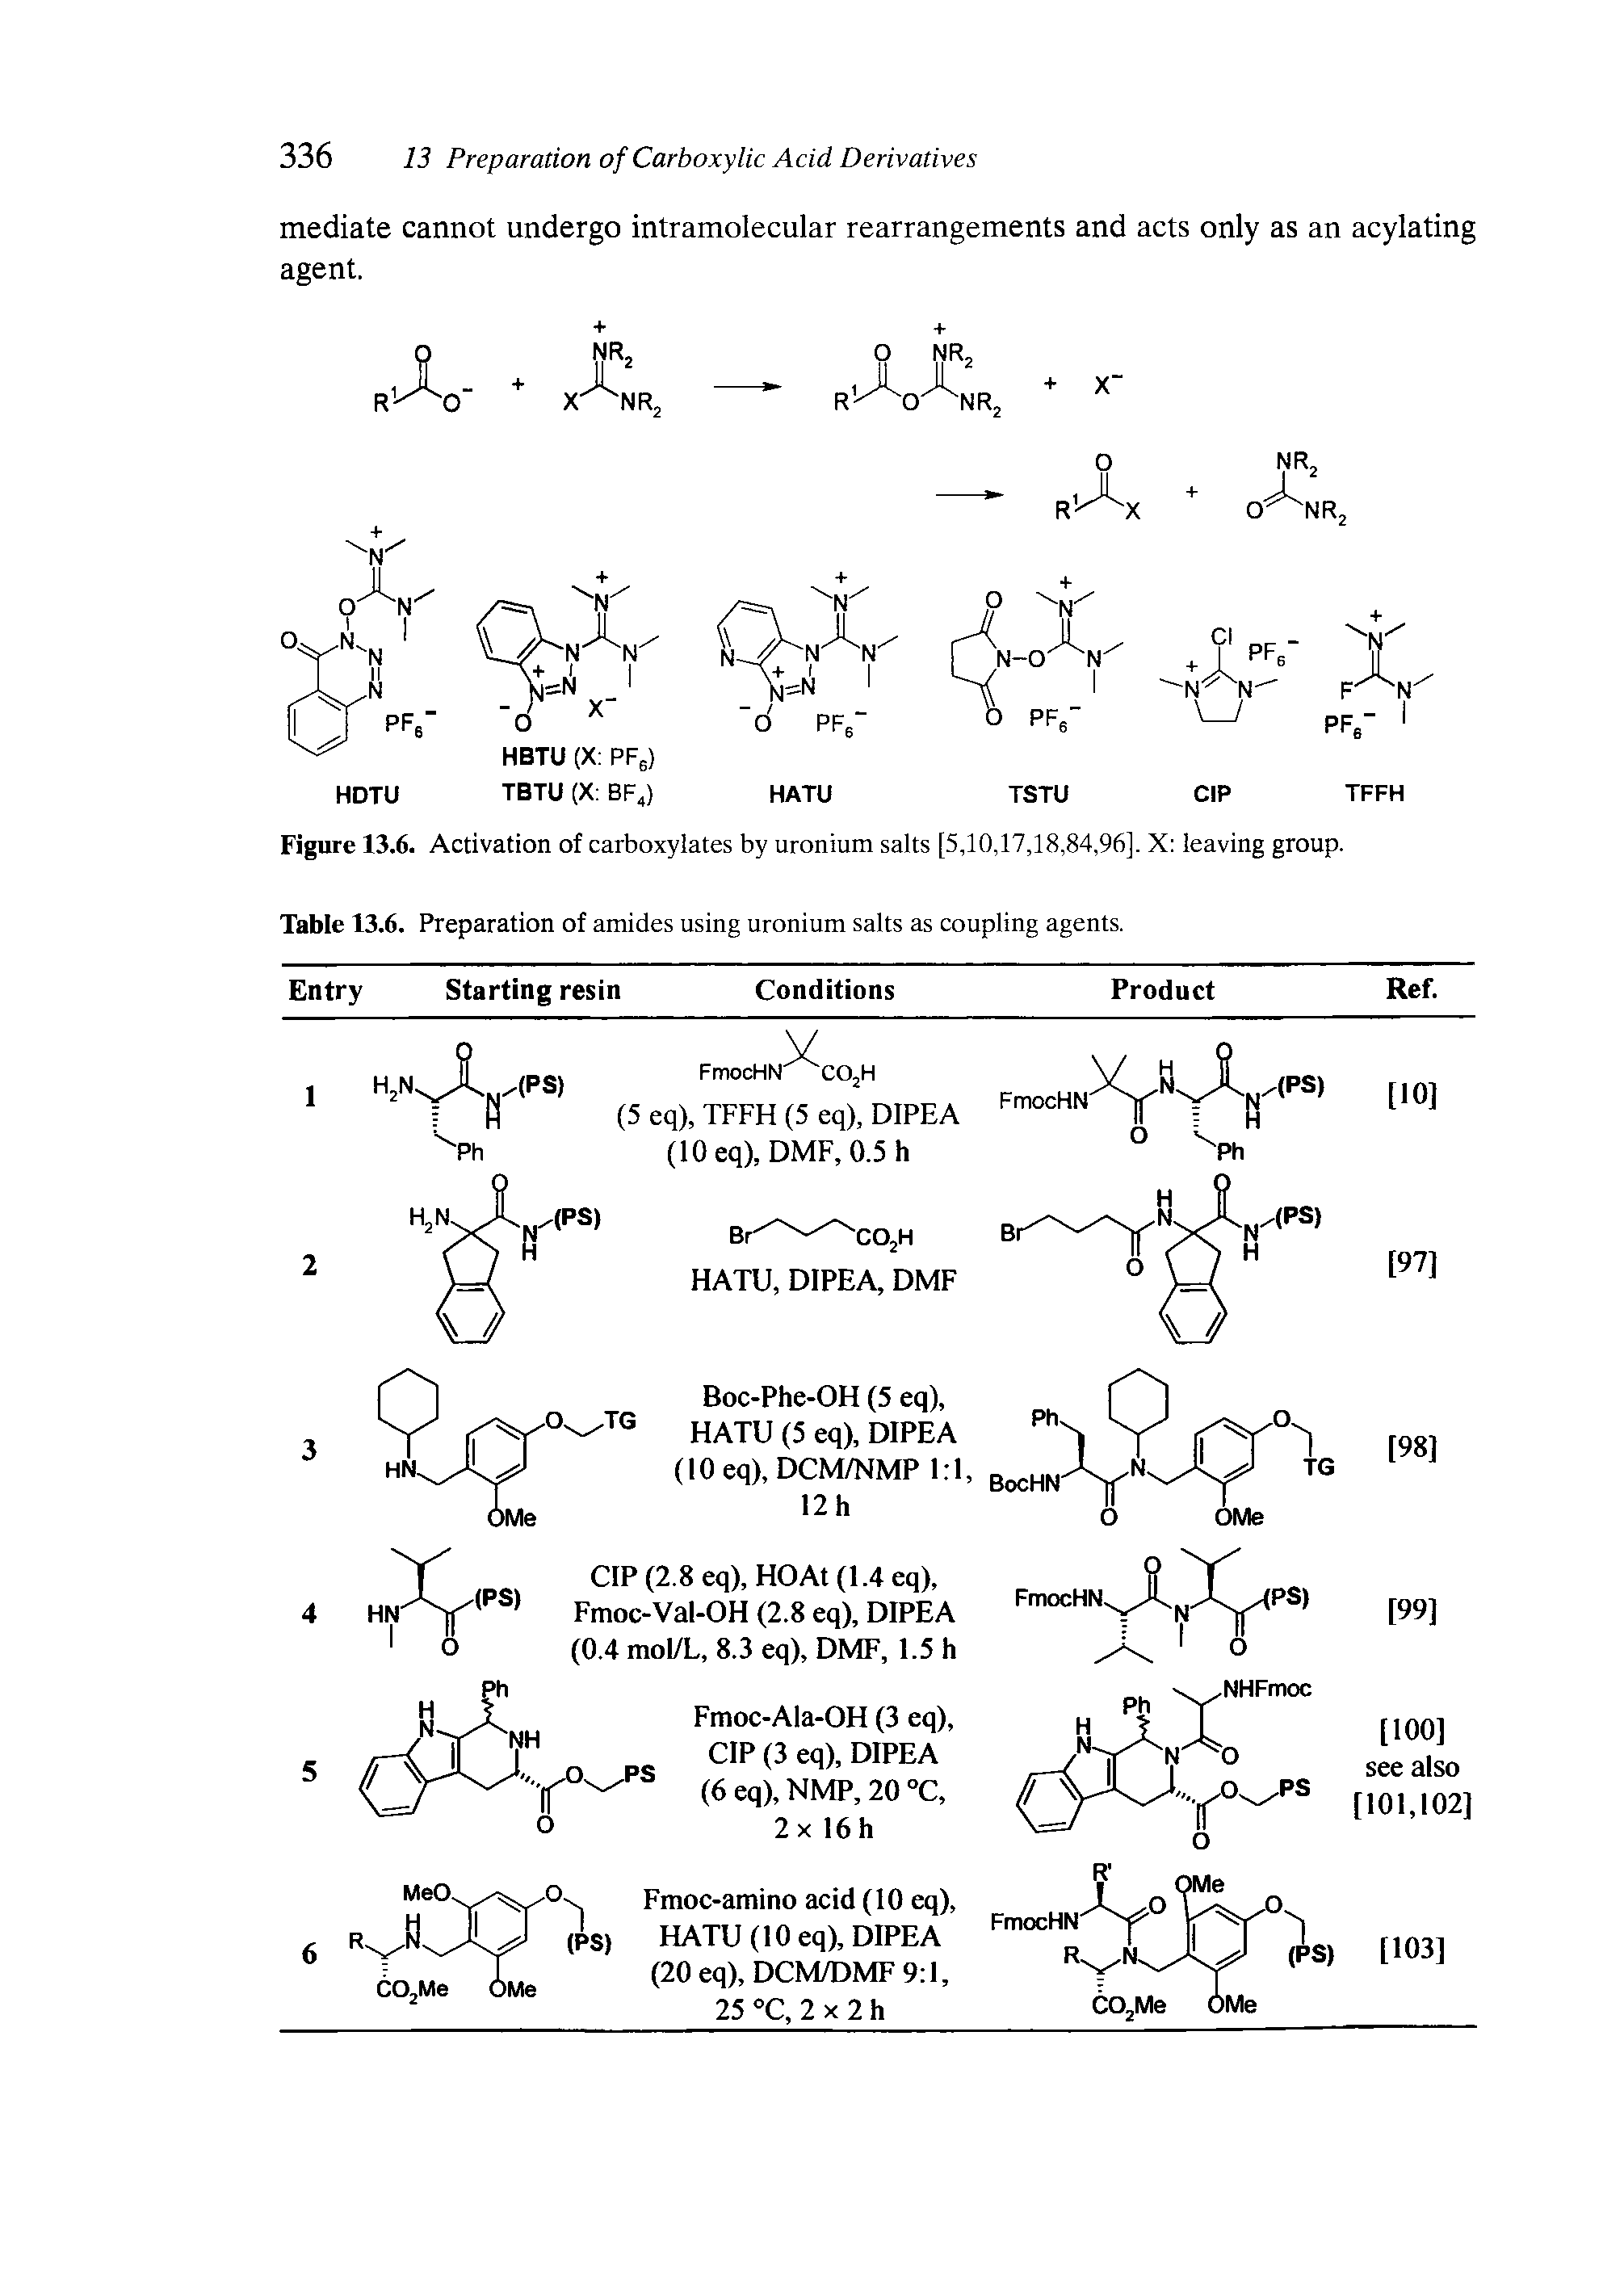 Figure 13.6. Activation of carboxylates by uronium salts [5,10,17,18,84,96], X leaving group. Table 13.6. Preparation of amides using uronium salts as coupling agents.